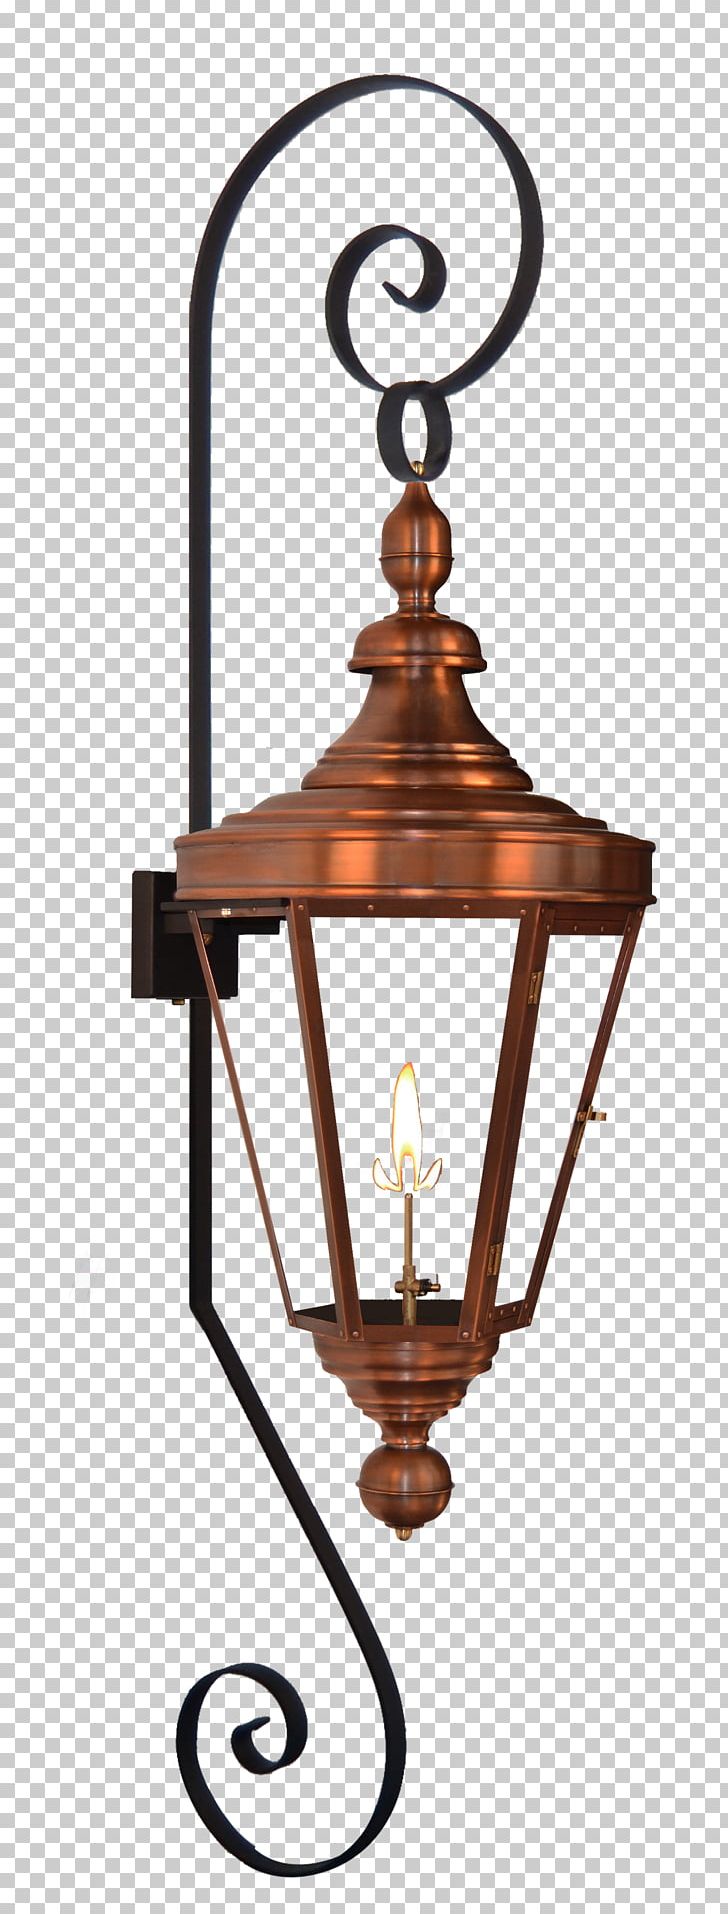 Lantern Light Fixture Gas Lighting Incandescent Light Bulb PNG, Clipart, Candle, Candlestick, Ceiling Fixture, Coppersmith, Electricity Free PNG Download